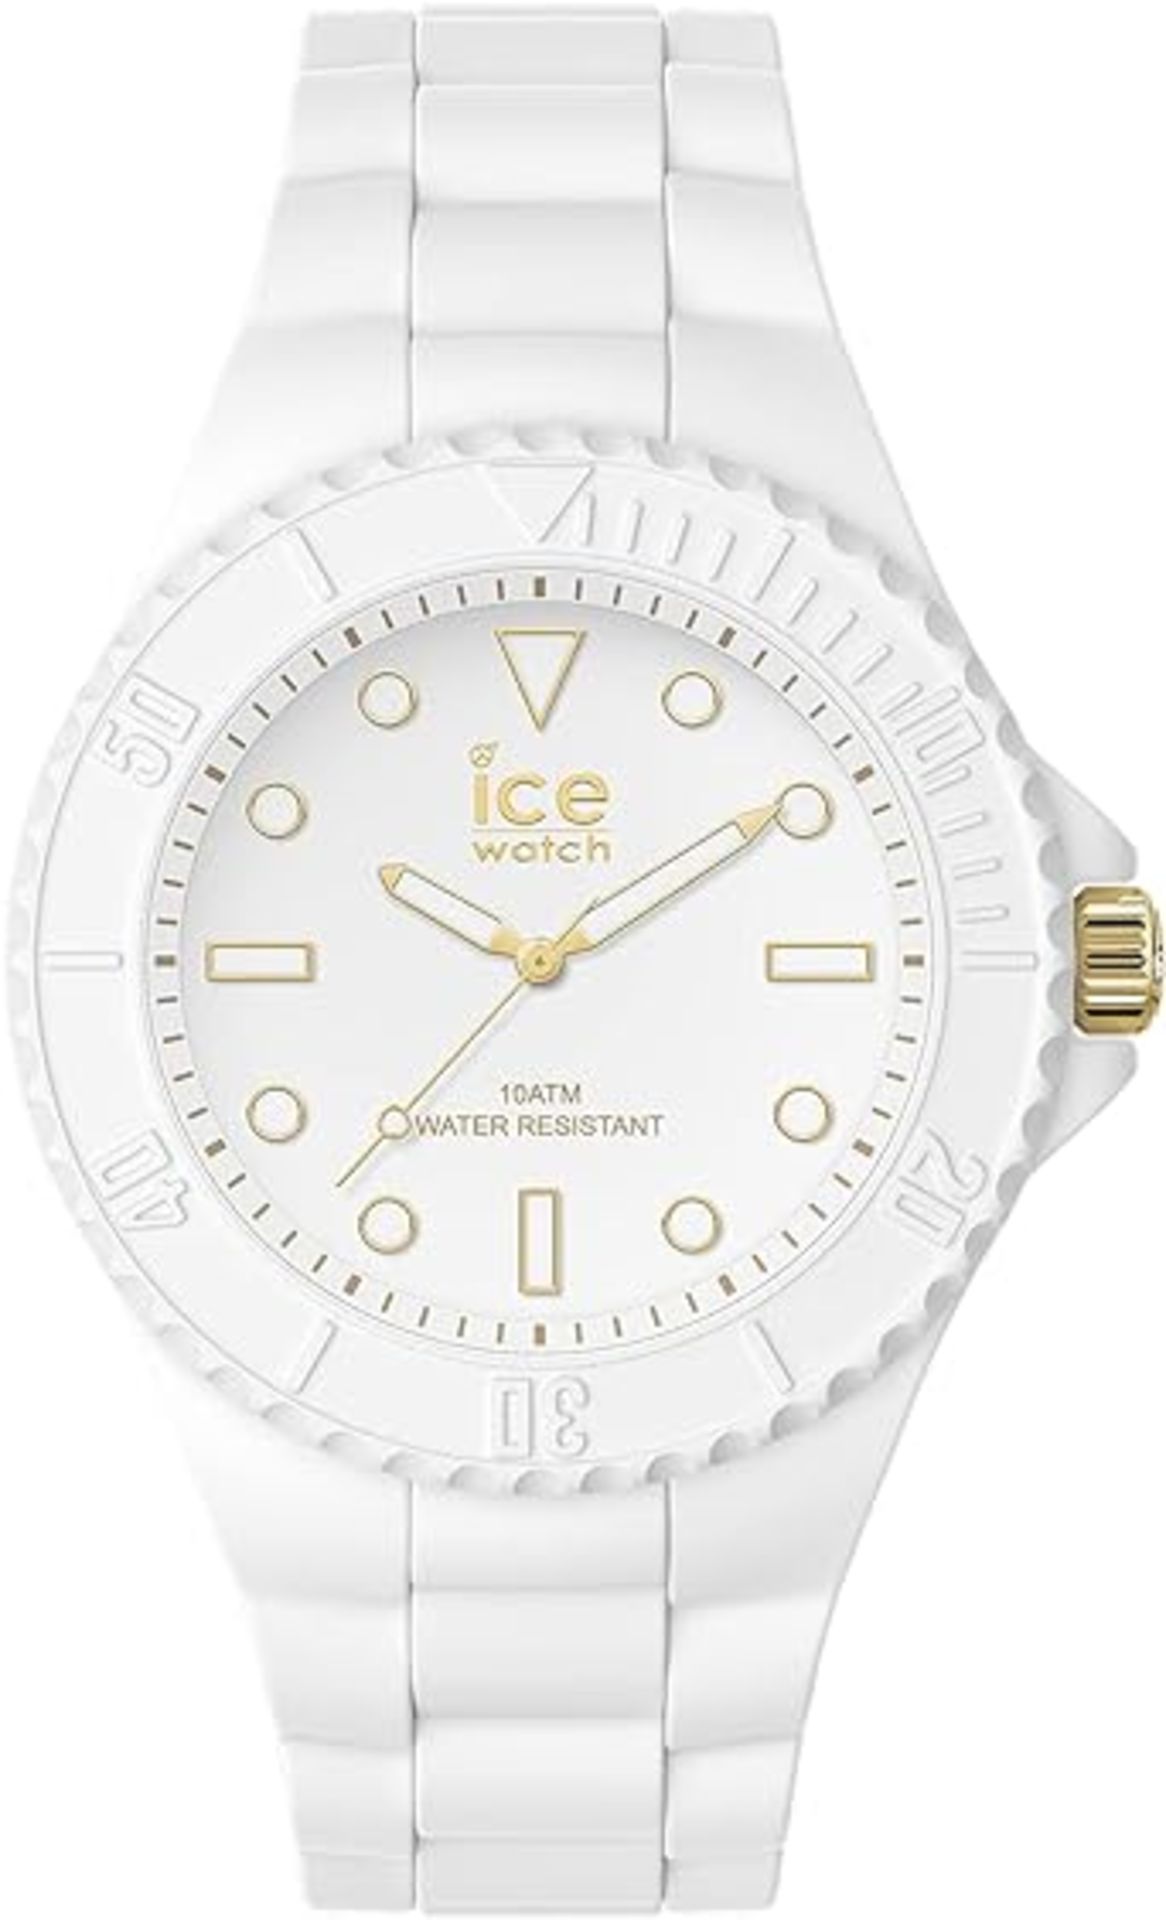 4x BRAND NEW ICE-WATCH Ice Generation Mens Watch. WHITE GOLD. RRP £75 EACH. (OFC152). Medium (40 mm)